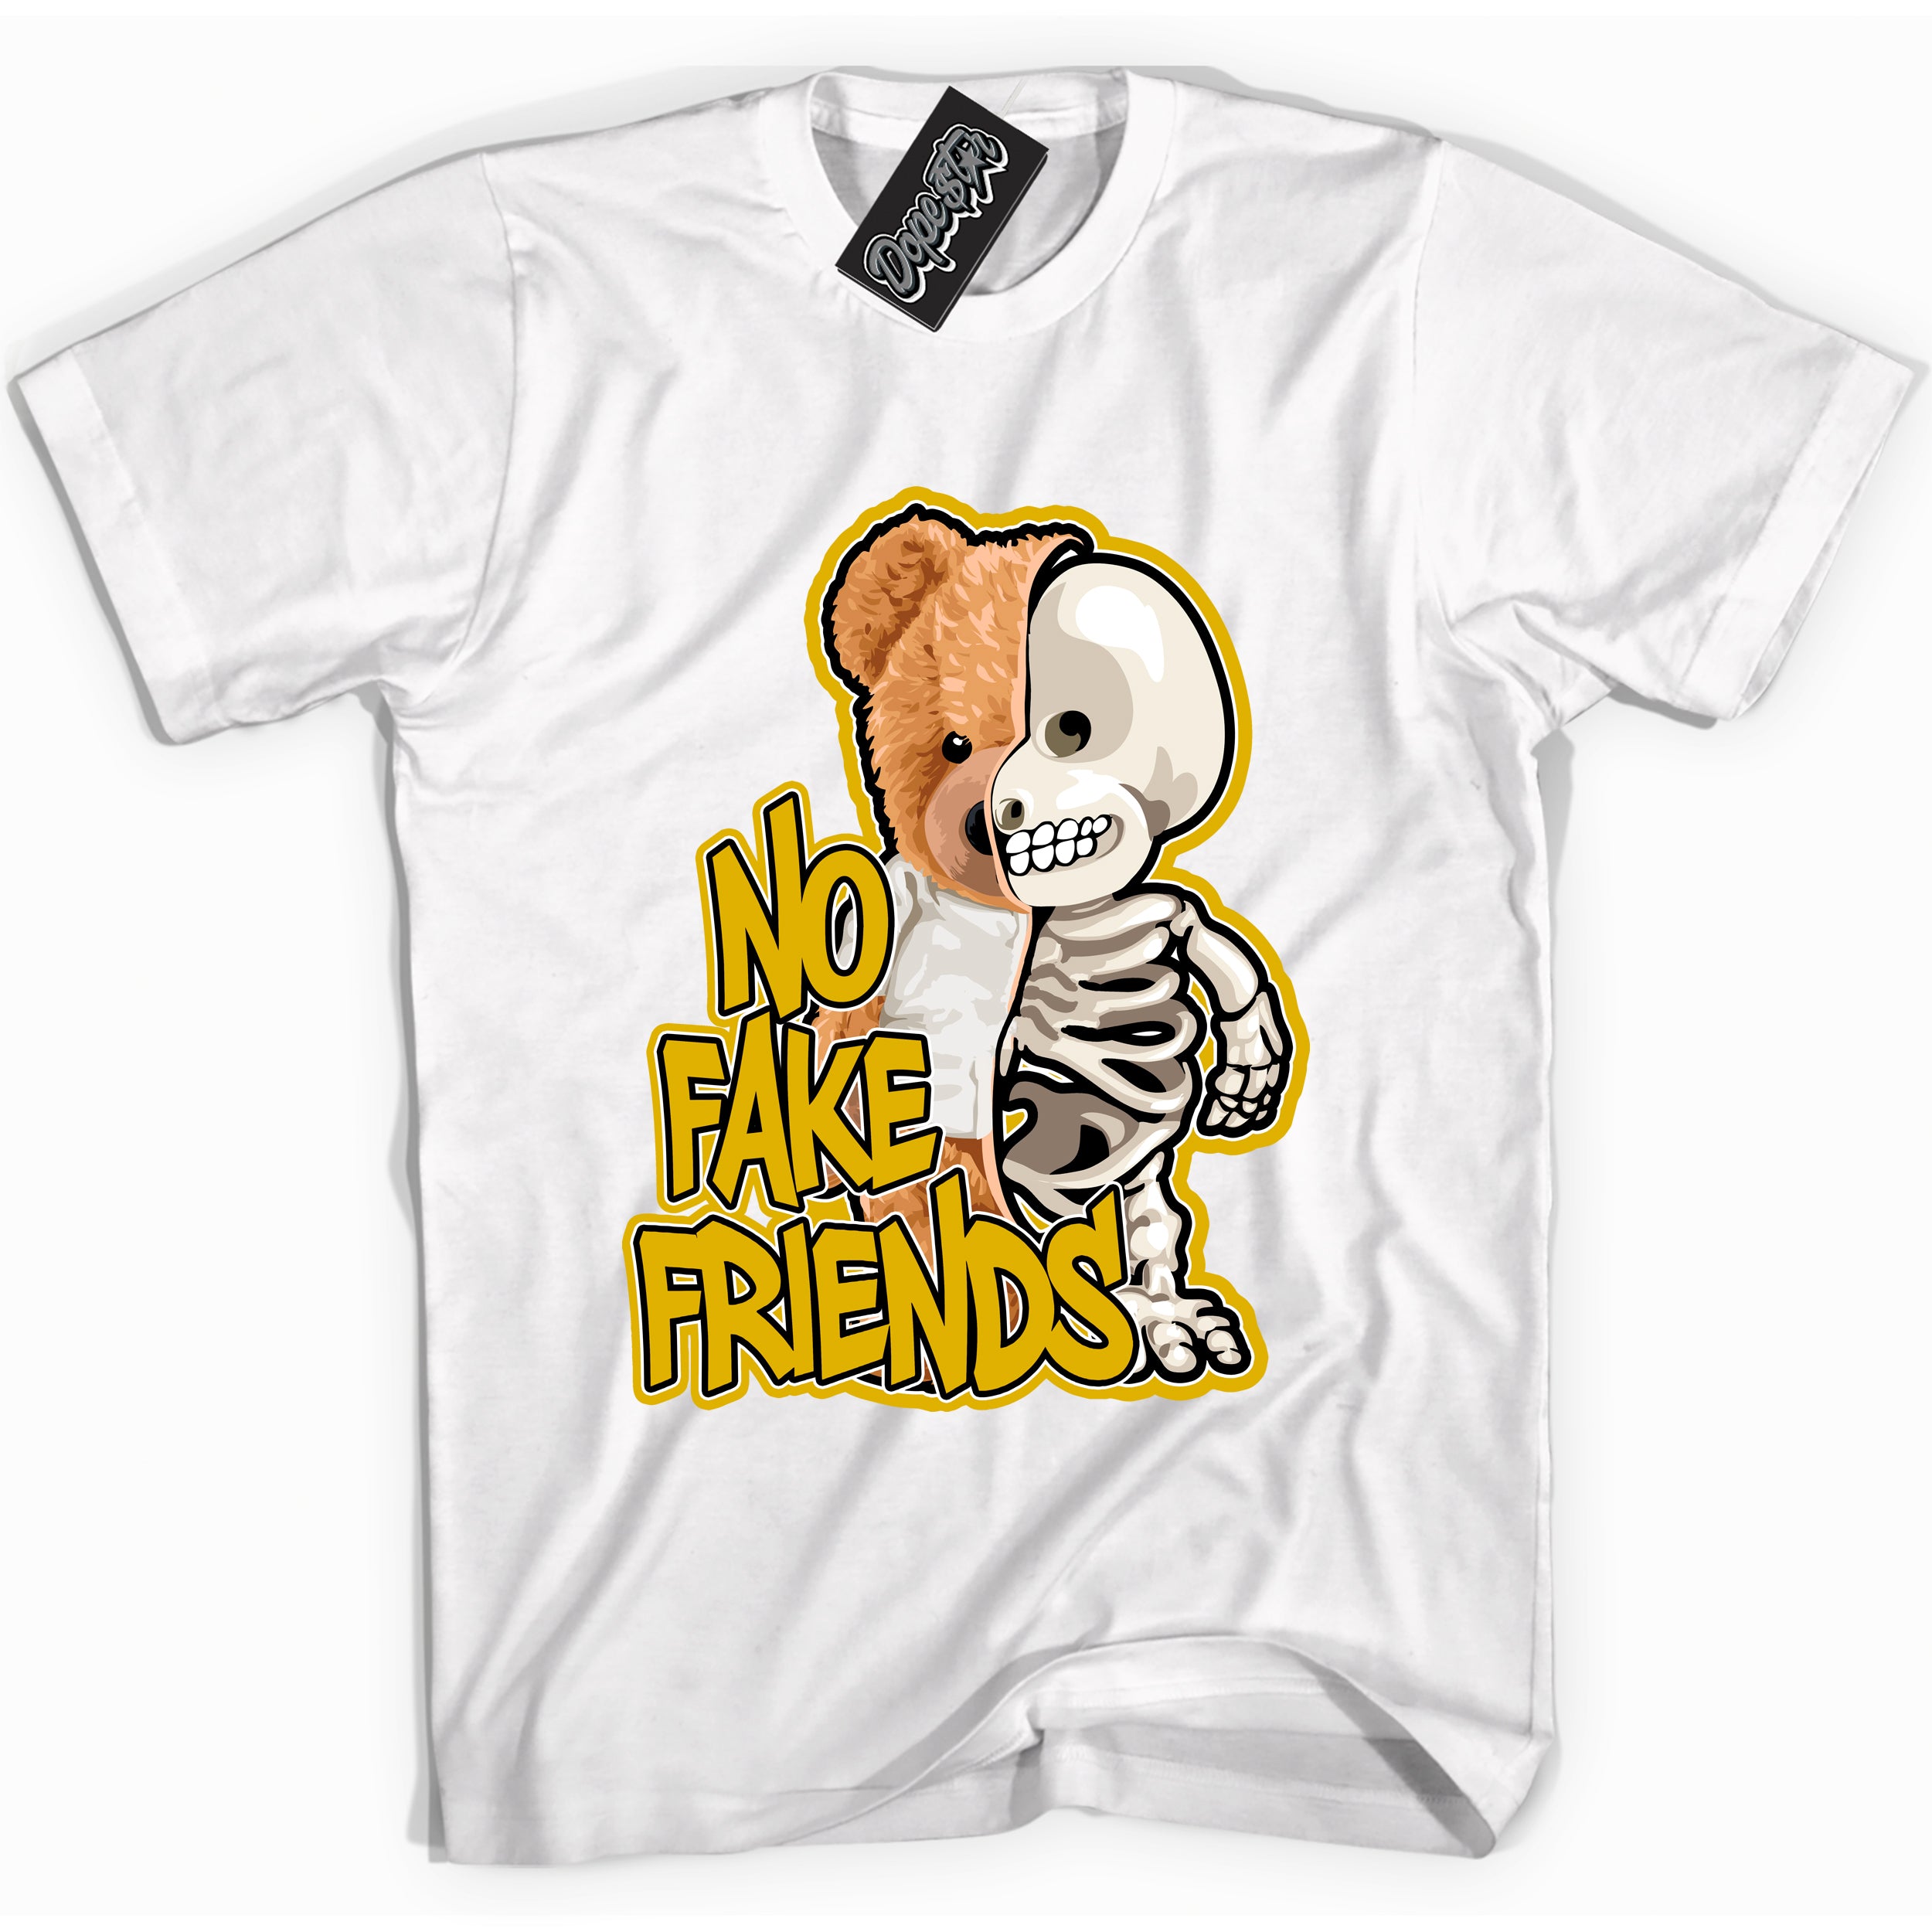 Cool White Shirt with “ No Fake Friends” design that perfectly matches Yellow Ochre 6s Sneakers.